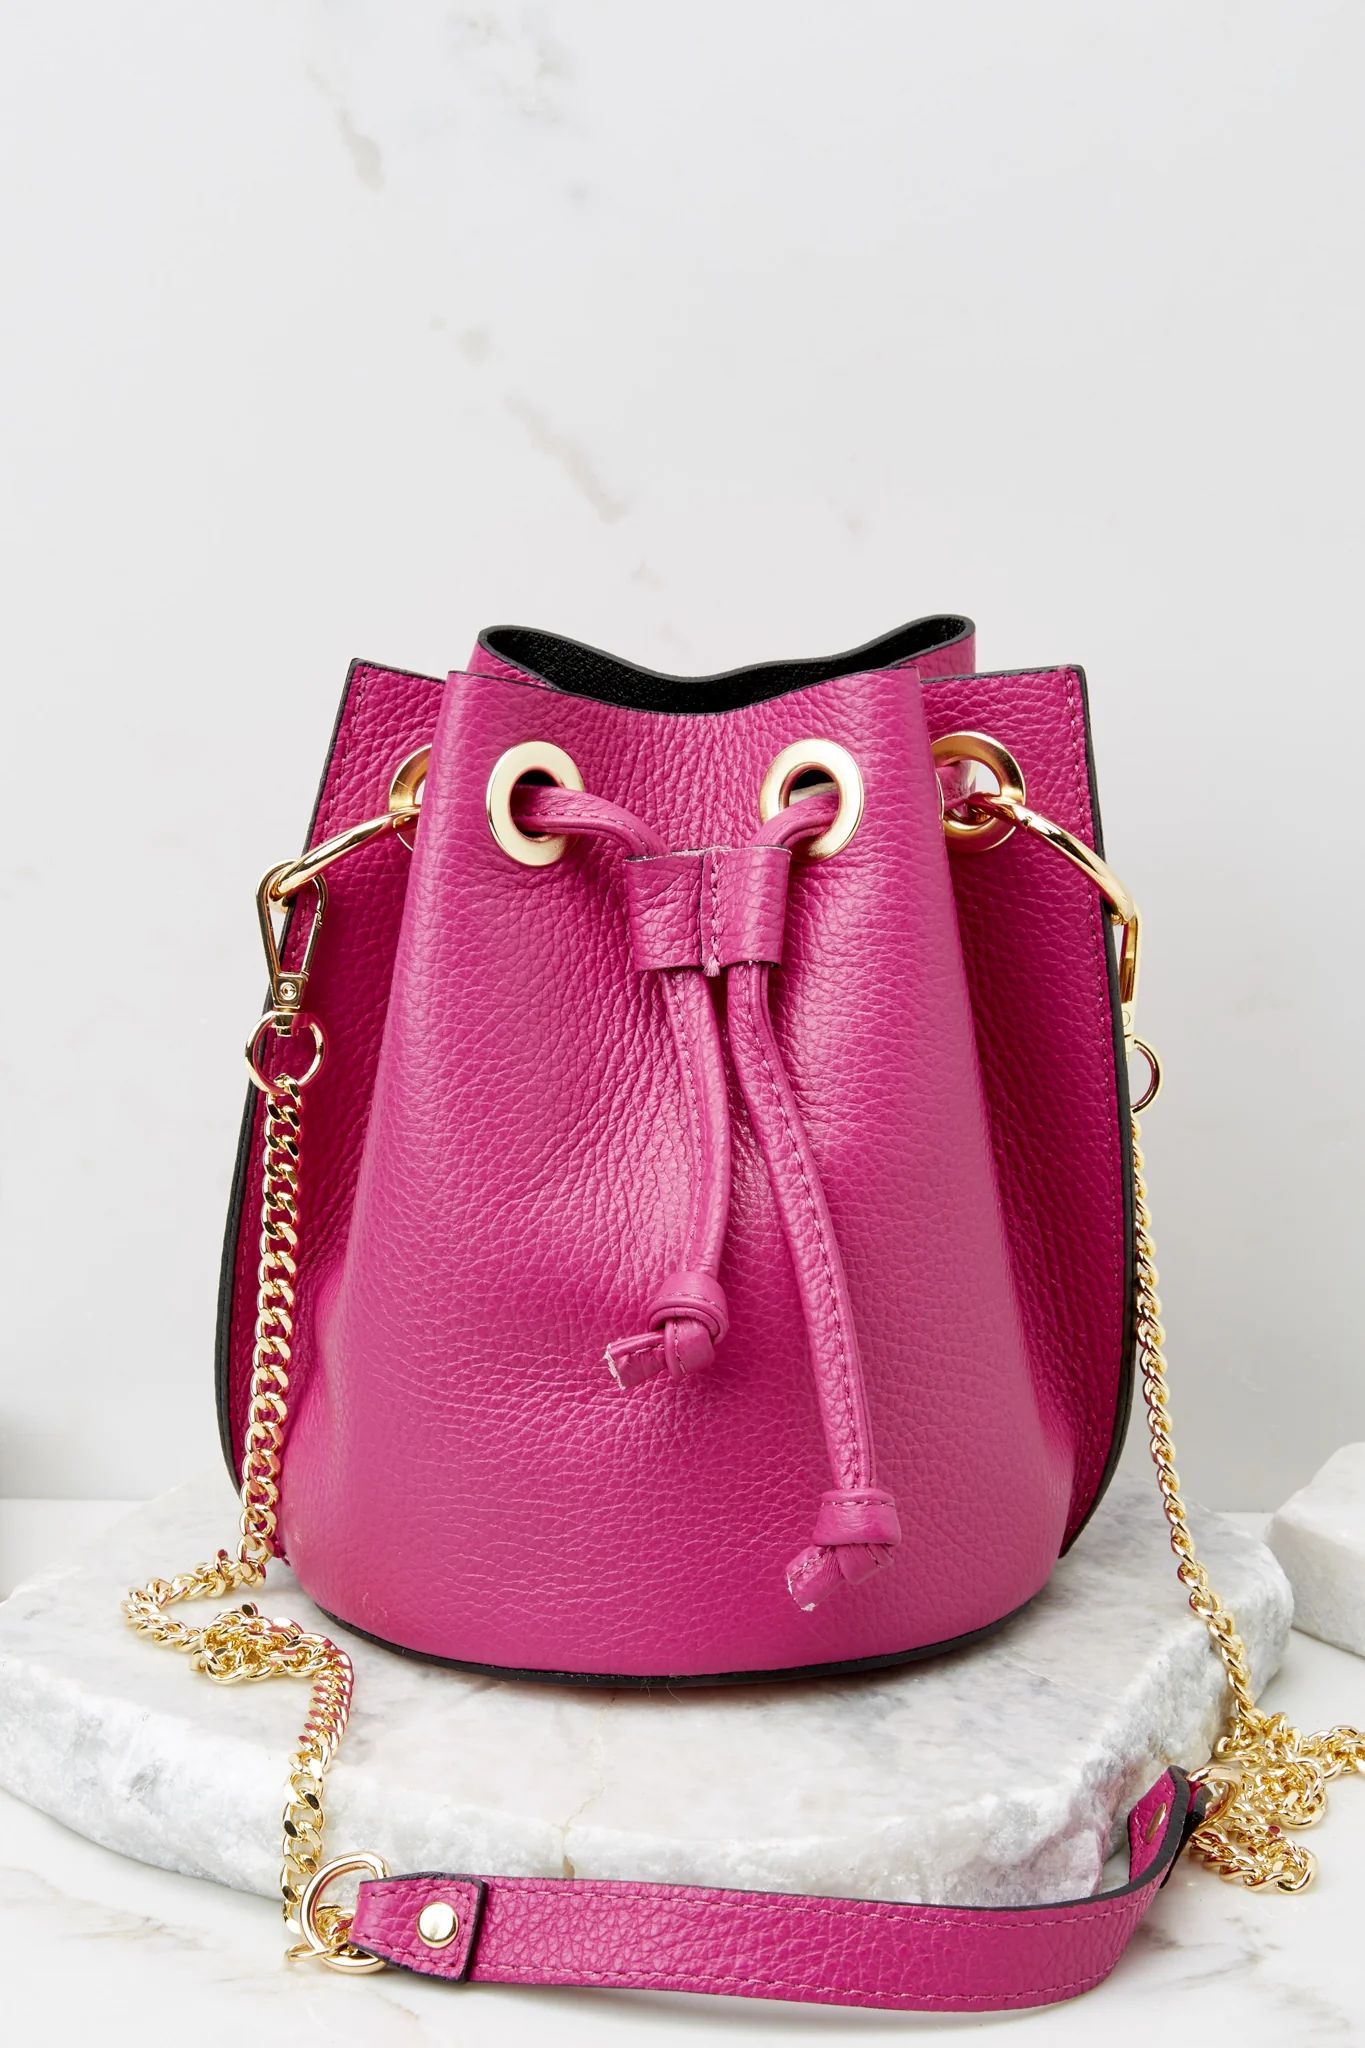 Drawn To You Hot Pink Leather Bag | Red Dress 